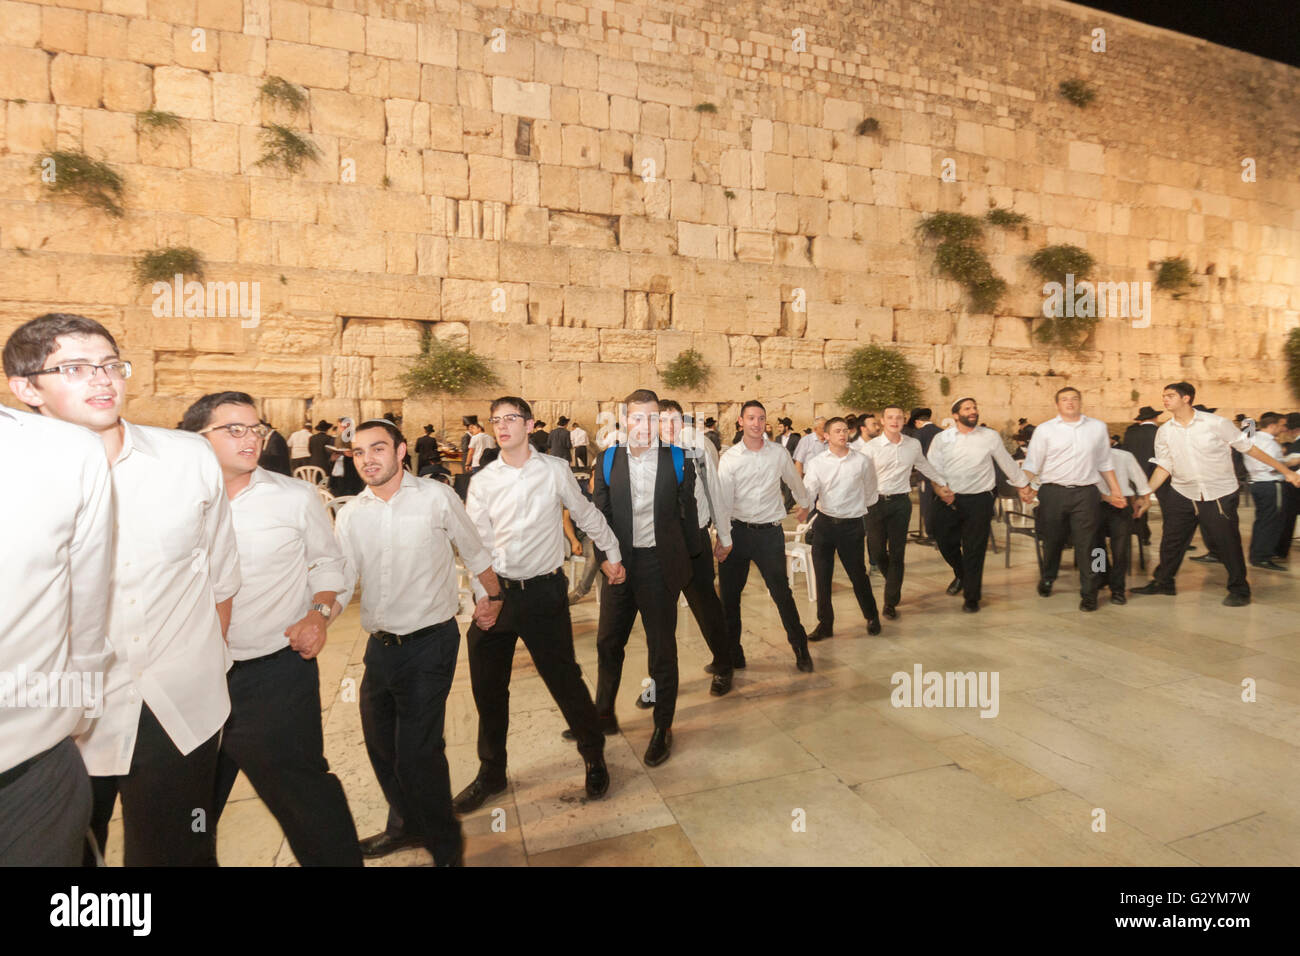 Jerusalem, Israel. 04th June, 2016. Jerusalem. A group of Yeshiva (Jewish High School) students dance with Israeli flags at the Western Wall, celebrating the 49th anniversary of the city's unification by Israeli soldiers in the Six-Day-War of 1967. Credit:  Yagil Henkin/Alamy Live News Stock Photo